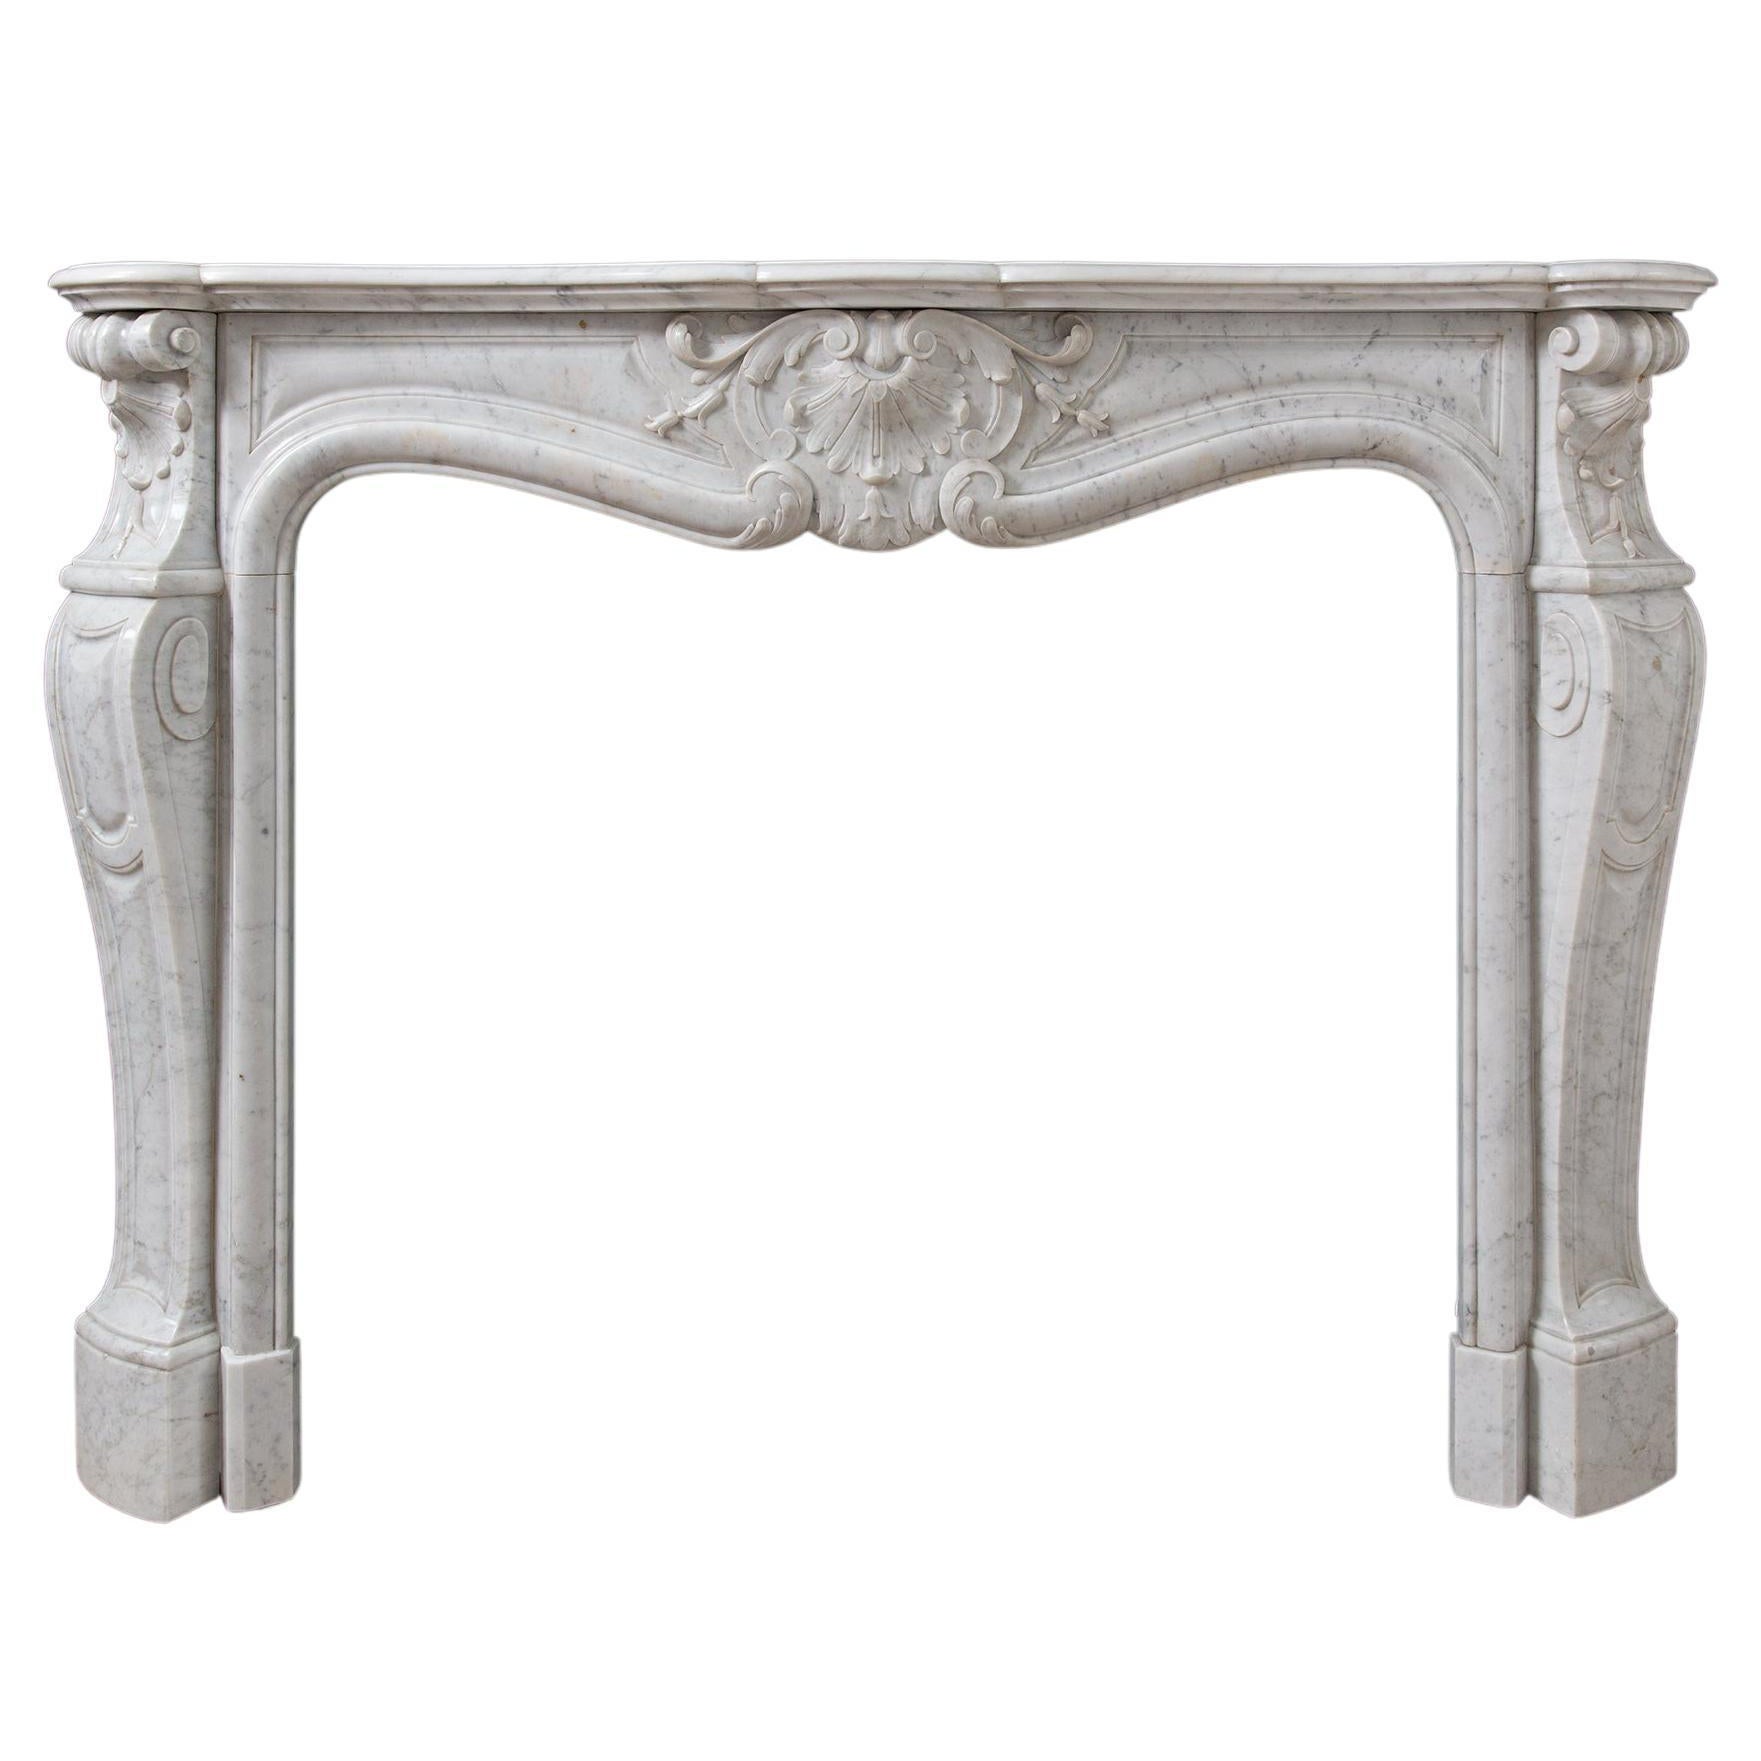 French Louis XV Carrara Marble Antique Fireplace Surround For Sale